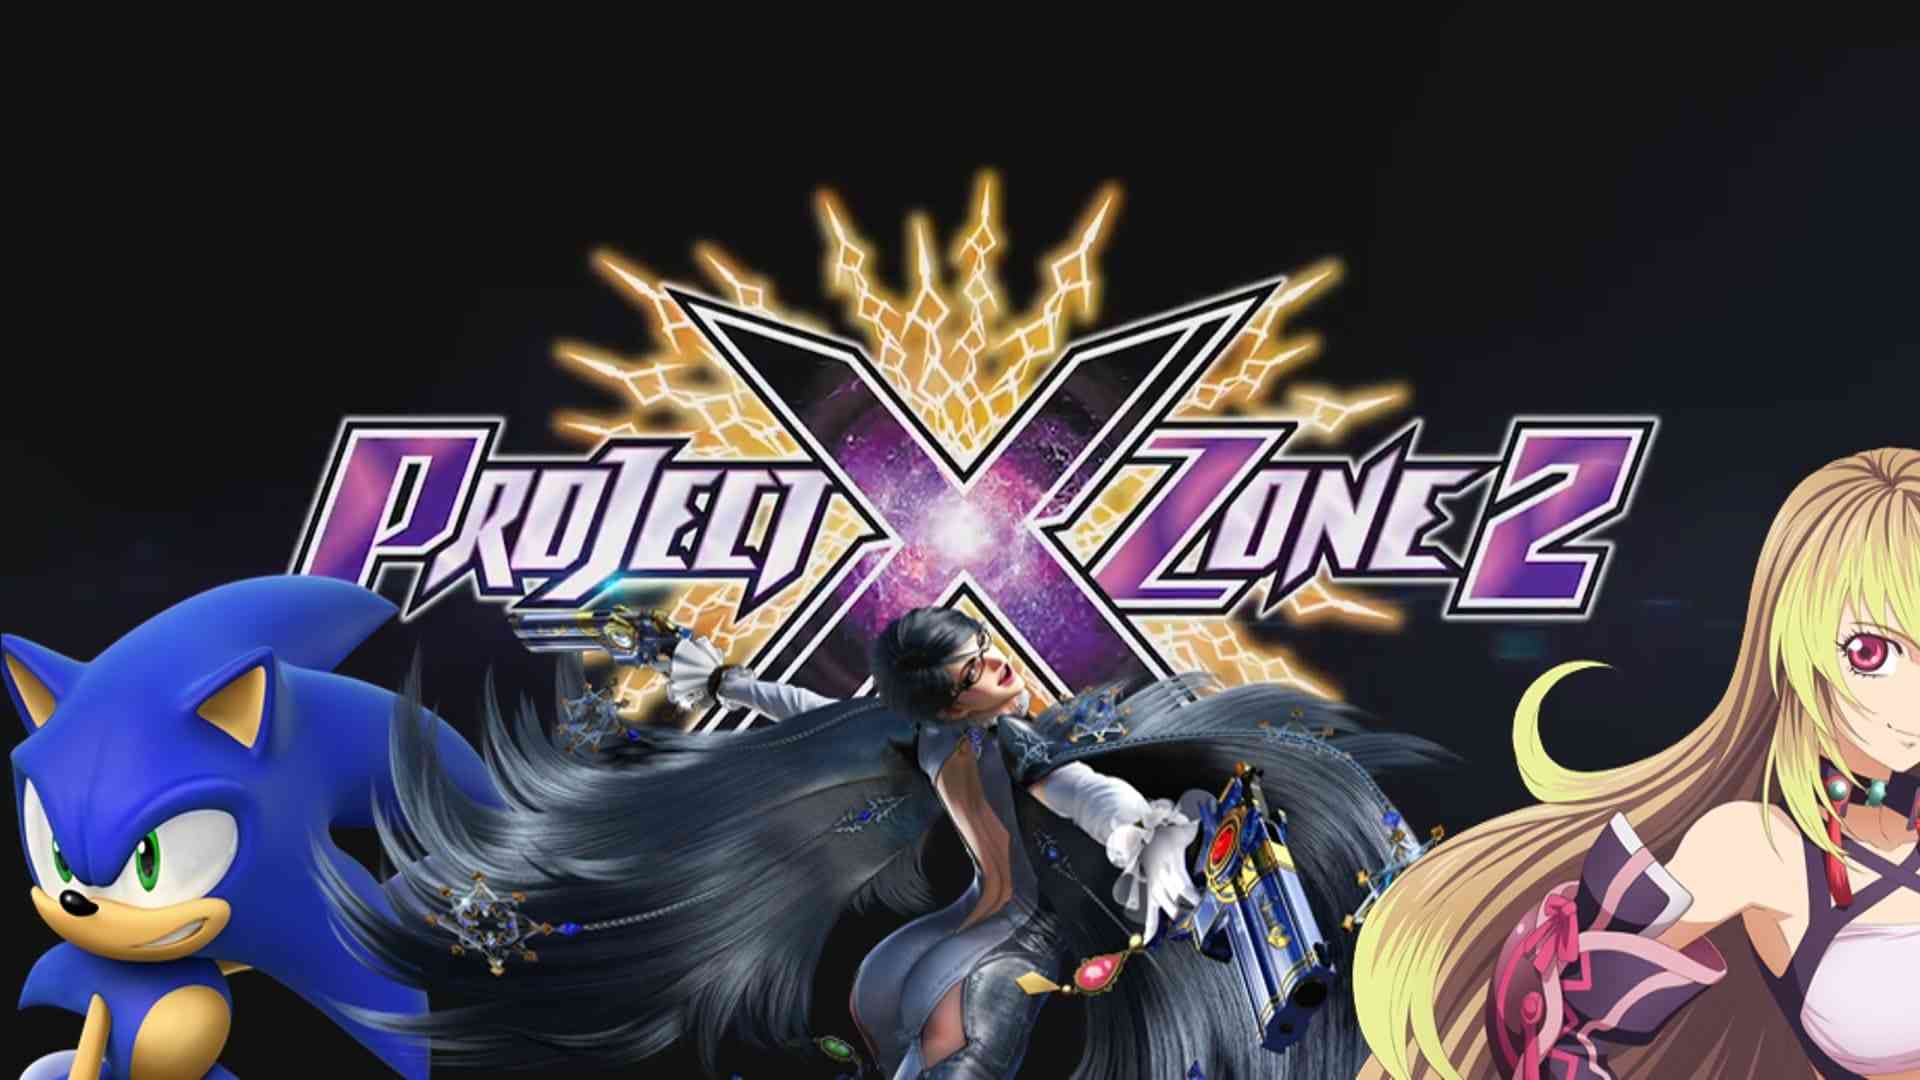 project x zone 2 switch download free